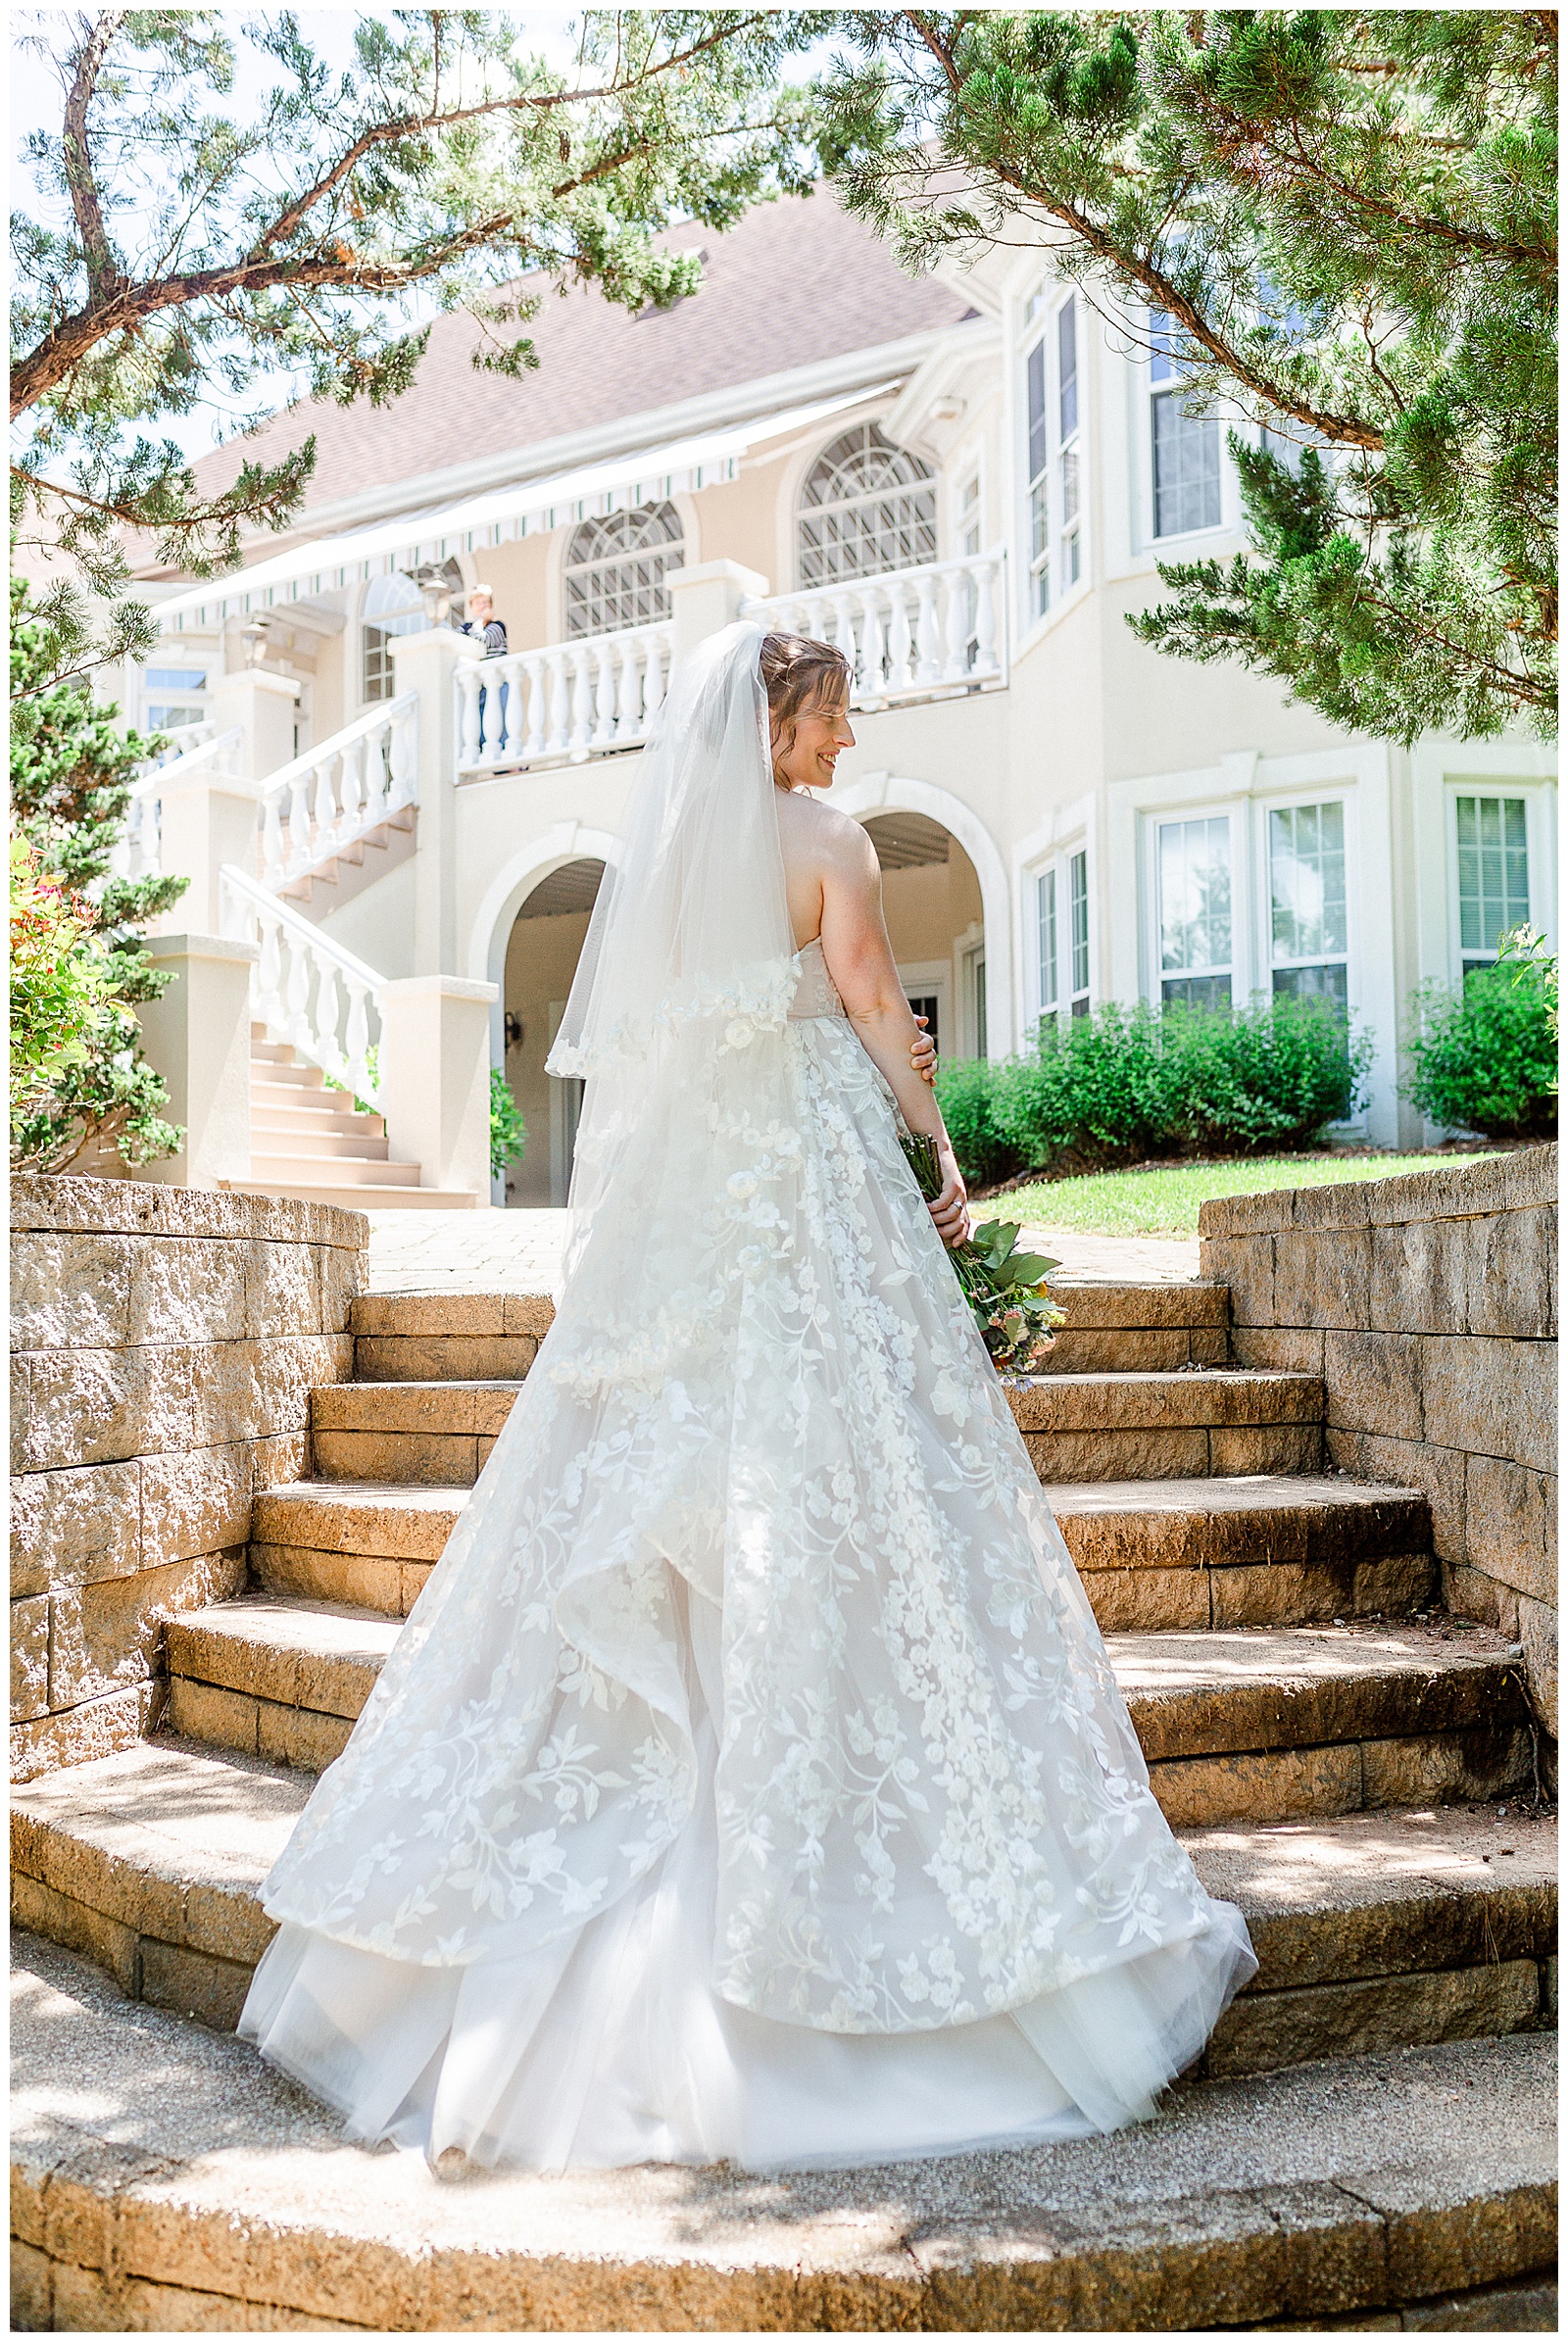 lakehouse mansion location 👰 Bride: lace wedding dress + veil 💐 Colorful orange and blue bouquet 📸 Outdoorsy Lake and Mountain Bridal Session with Julia | Kevyn Dixon Photography